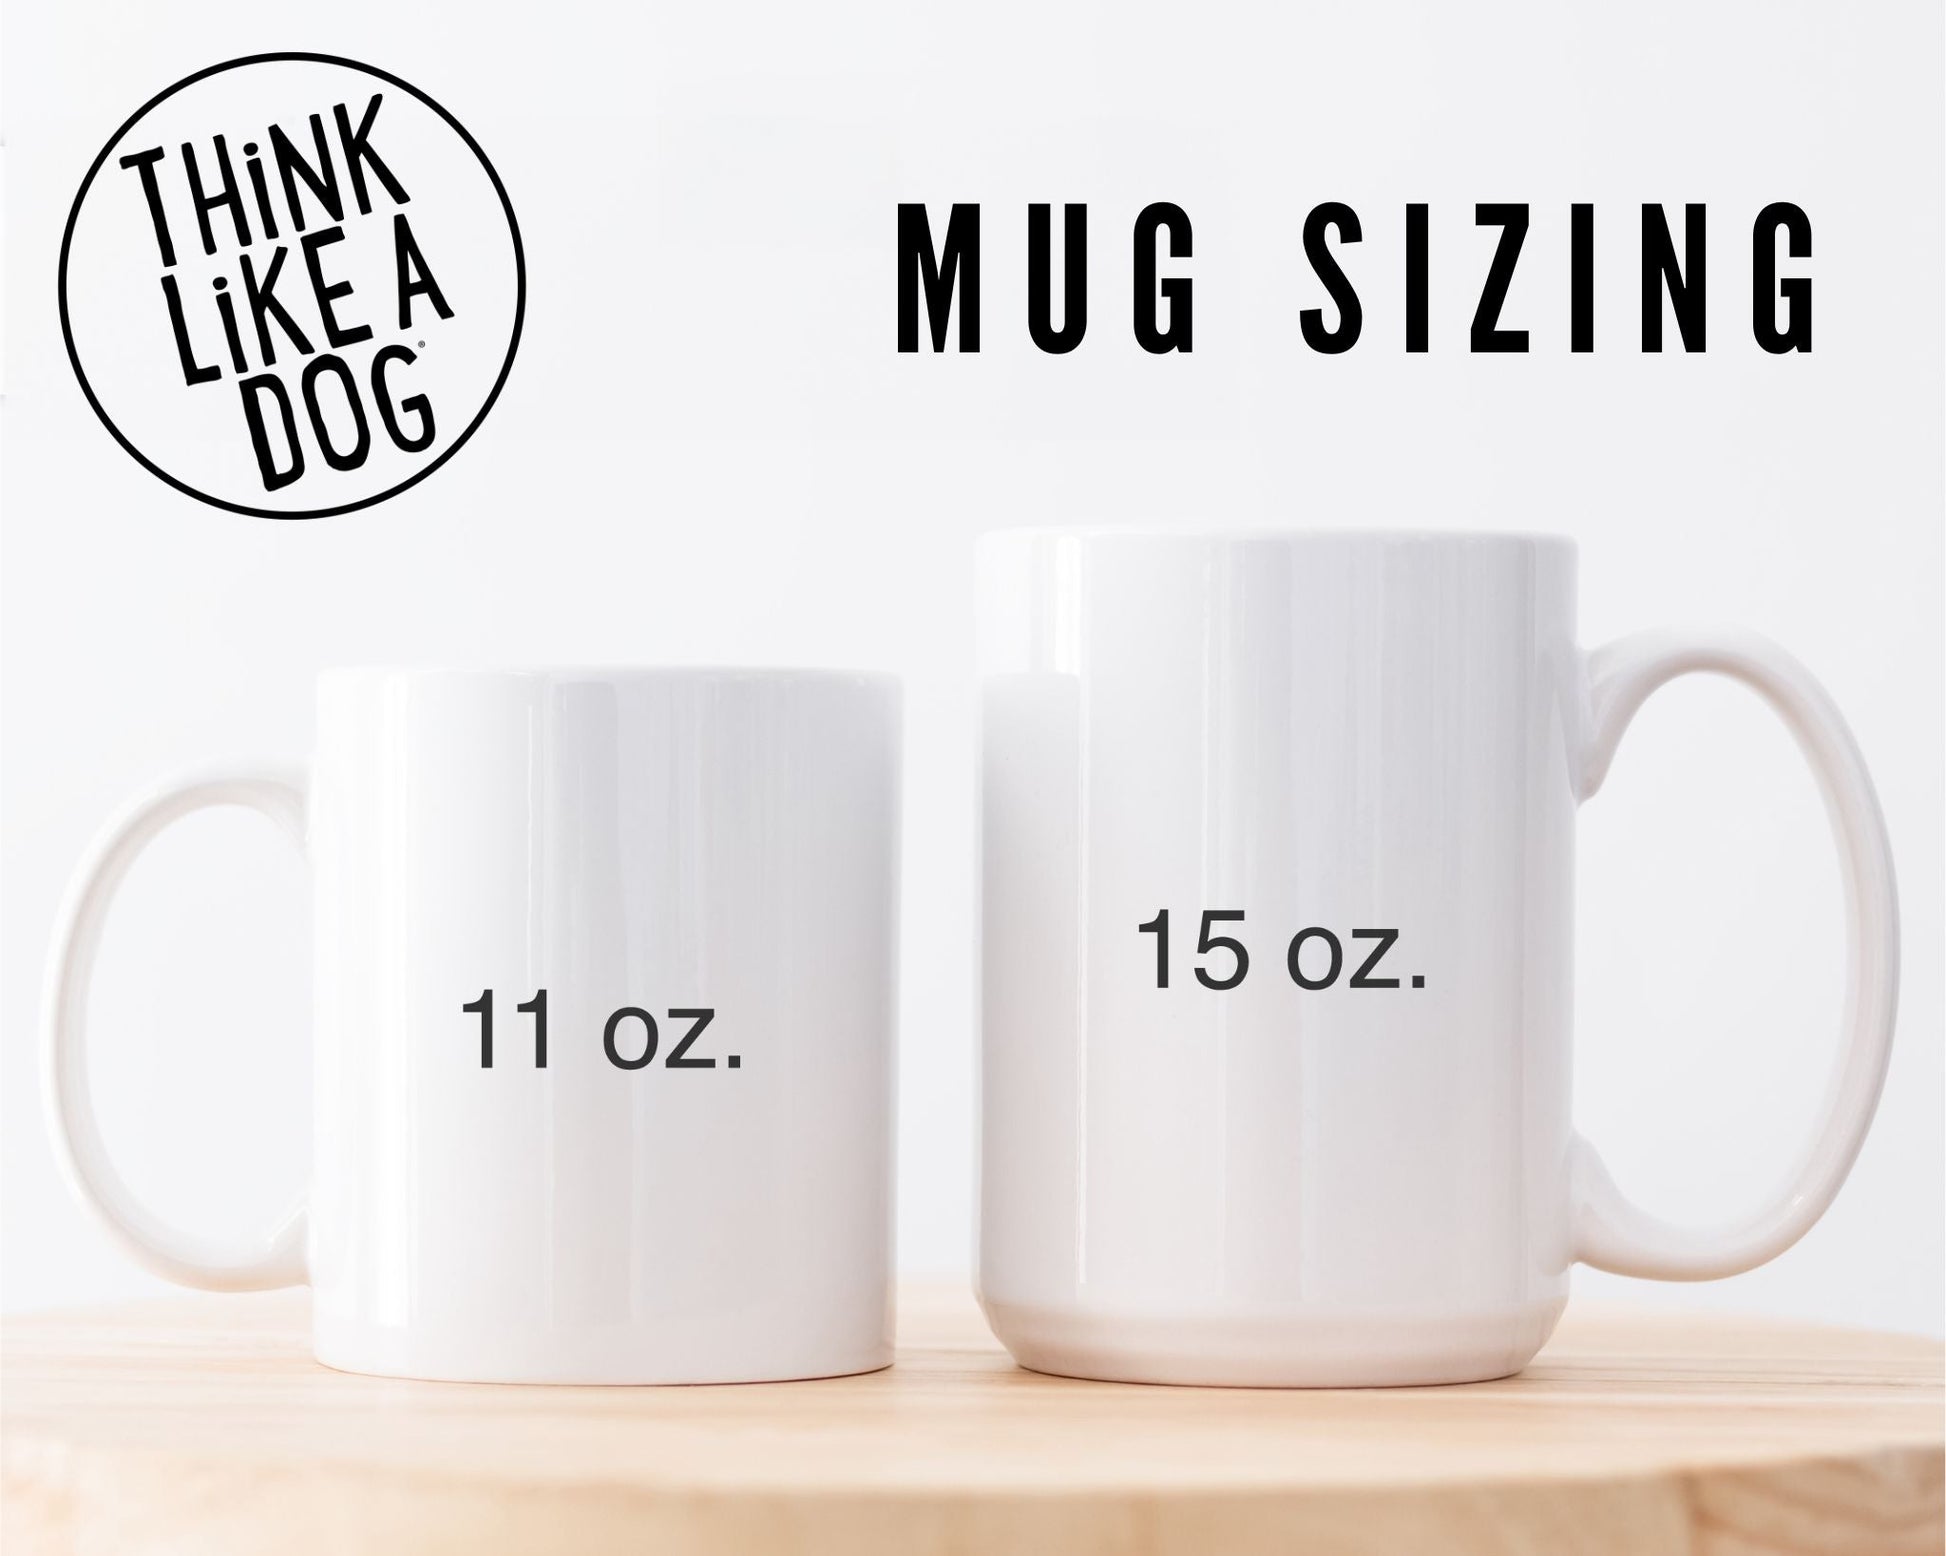 Comparison of 11 oz and 15 oz White Glossy Mugs Navy Blue THiNK LiKE A DOG® Logo for dog lovers.